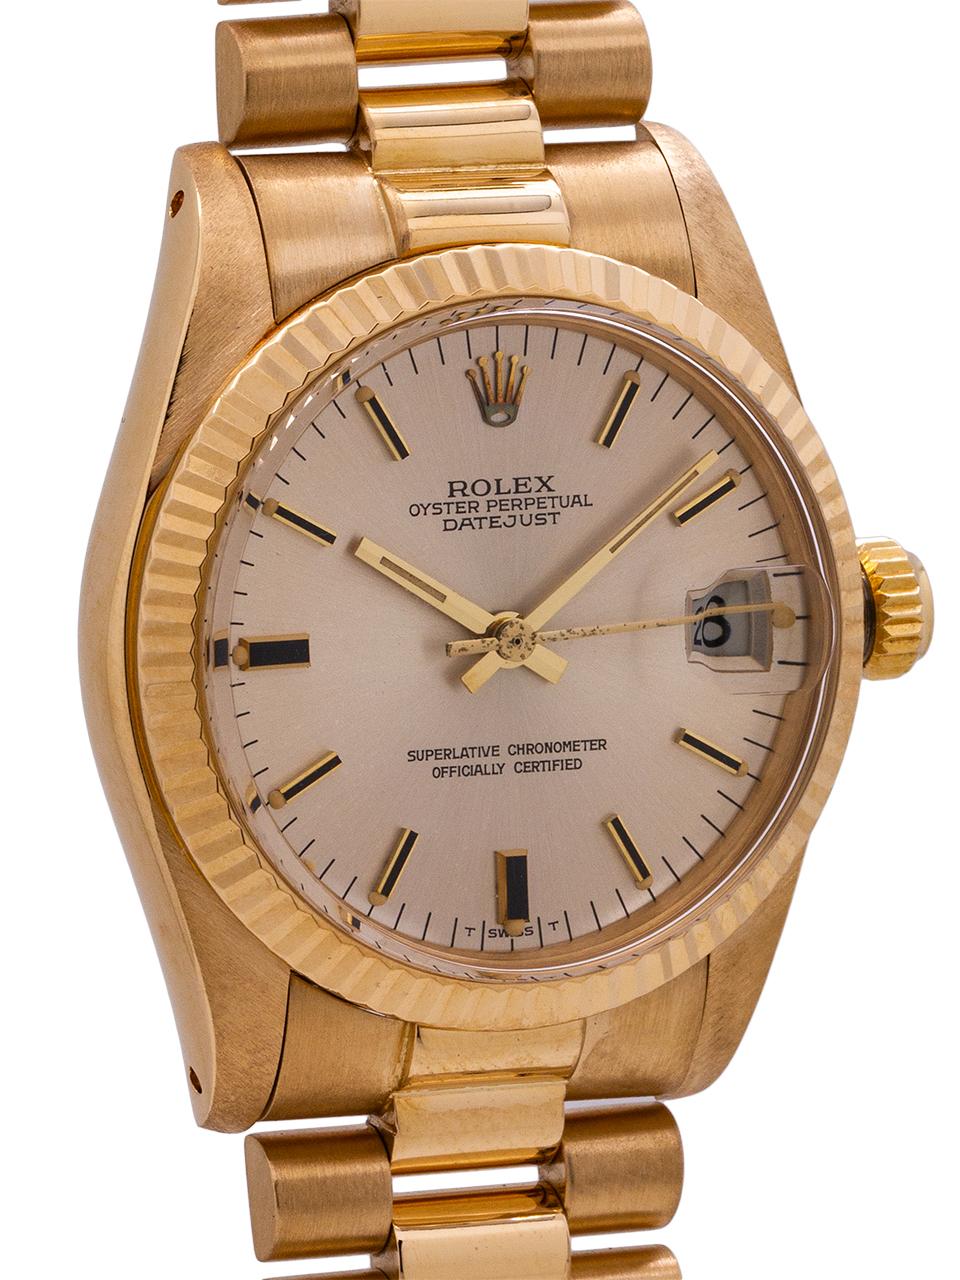 Rolex midsize Datejust 18K YG ref 6828, serial # 6.2 million circa 1979. Featuring a 31mm diameter yellow gold case with fluted bezel in exceptionally mint condition. With acrylic crystal and original matte silvered dial with applied gold  indexes,